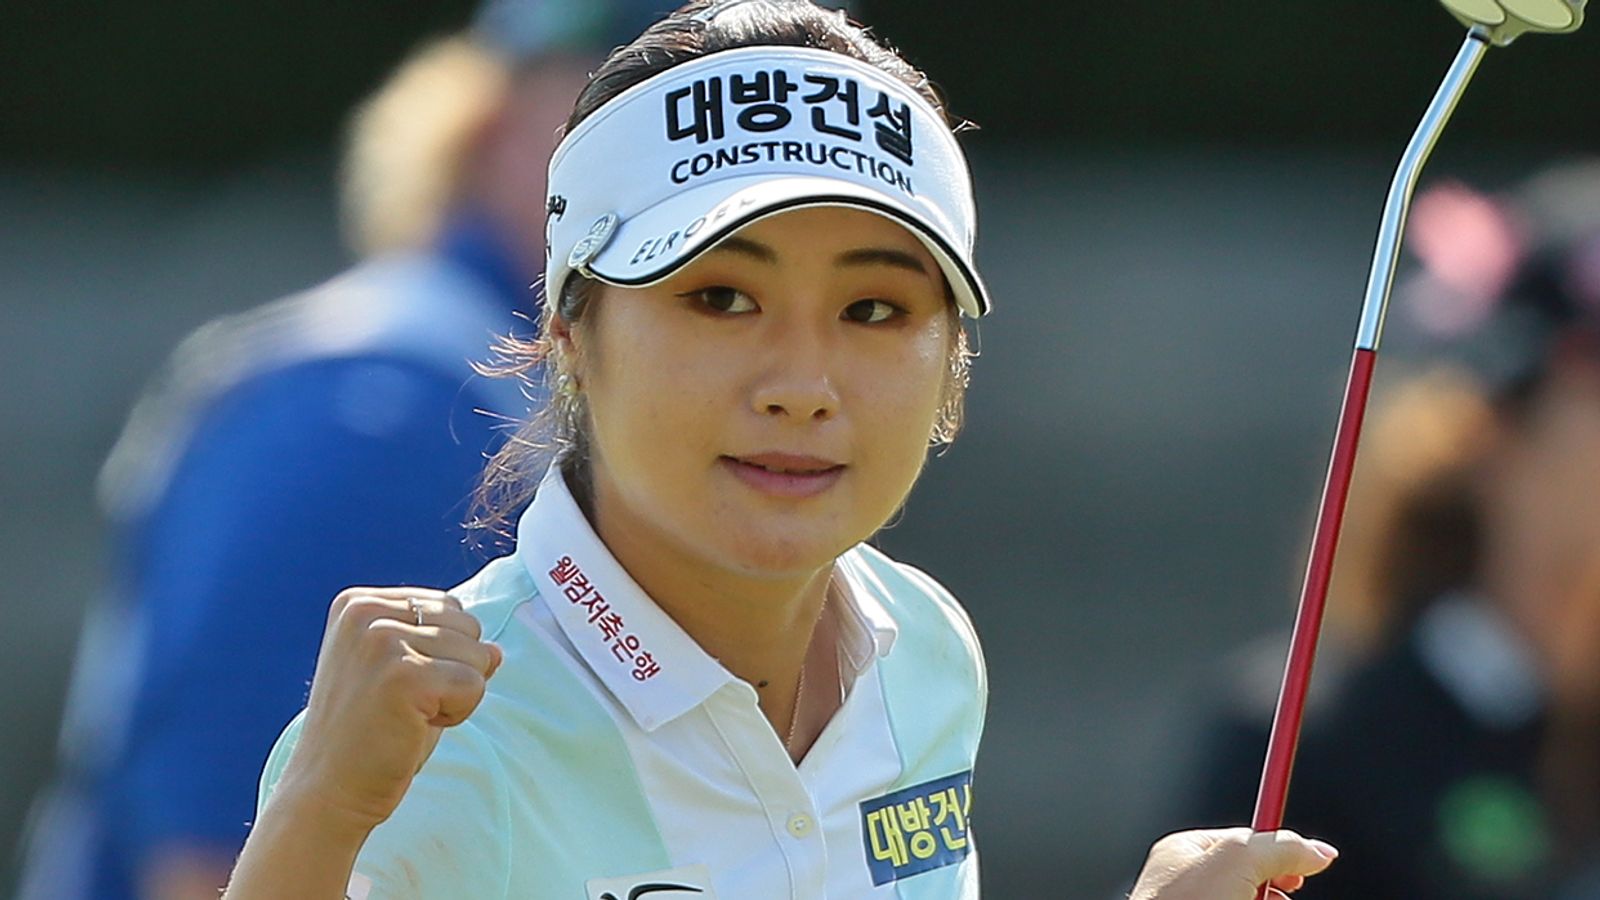 Jeongeun Lee 6 delivered a outstanding